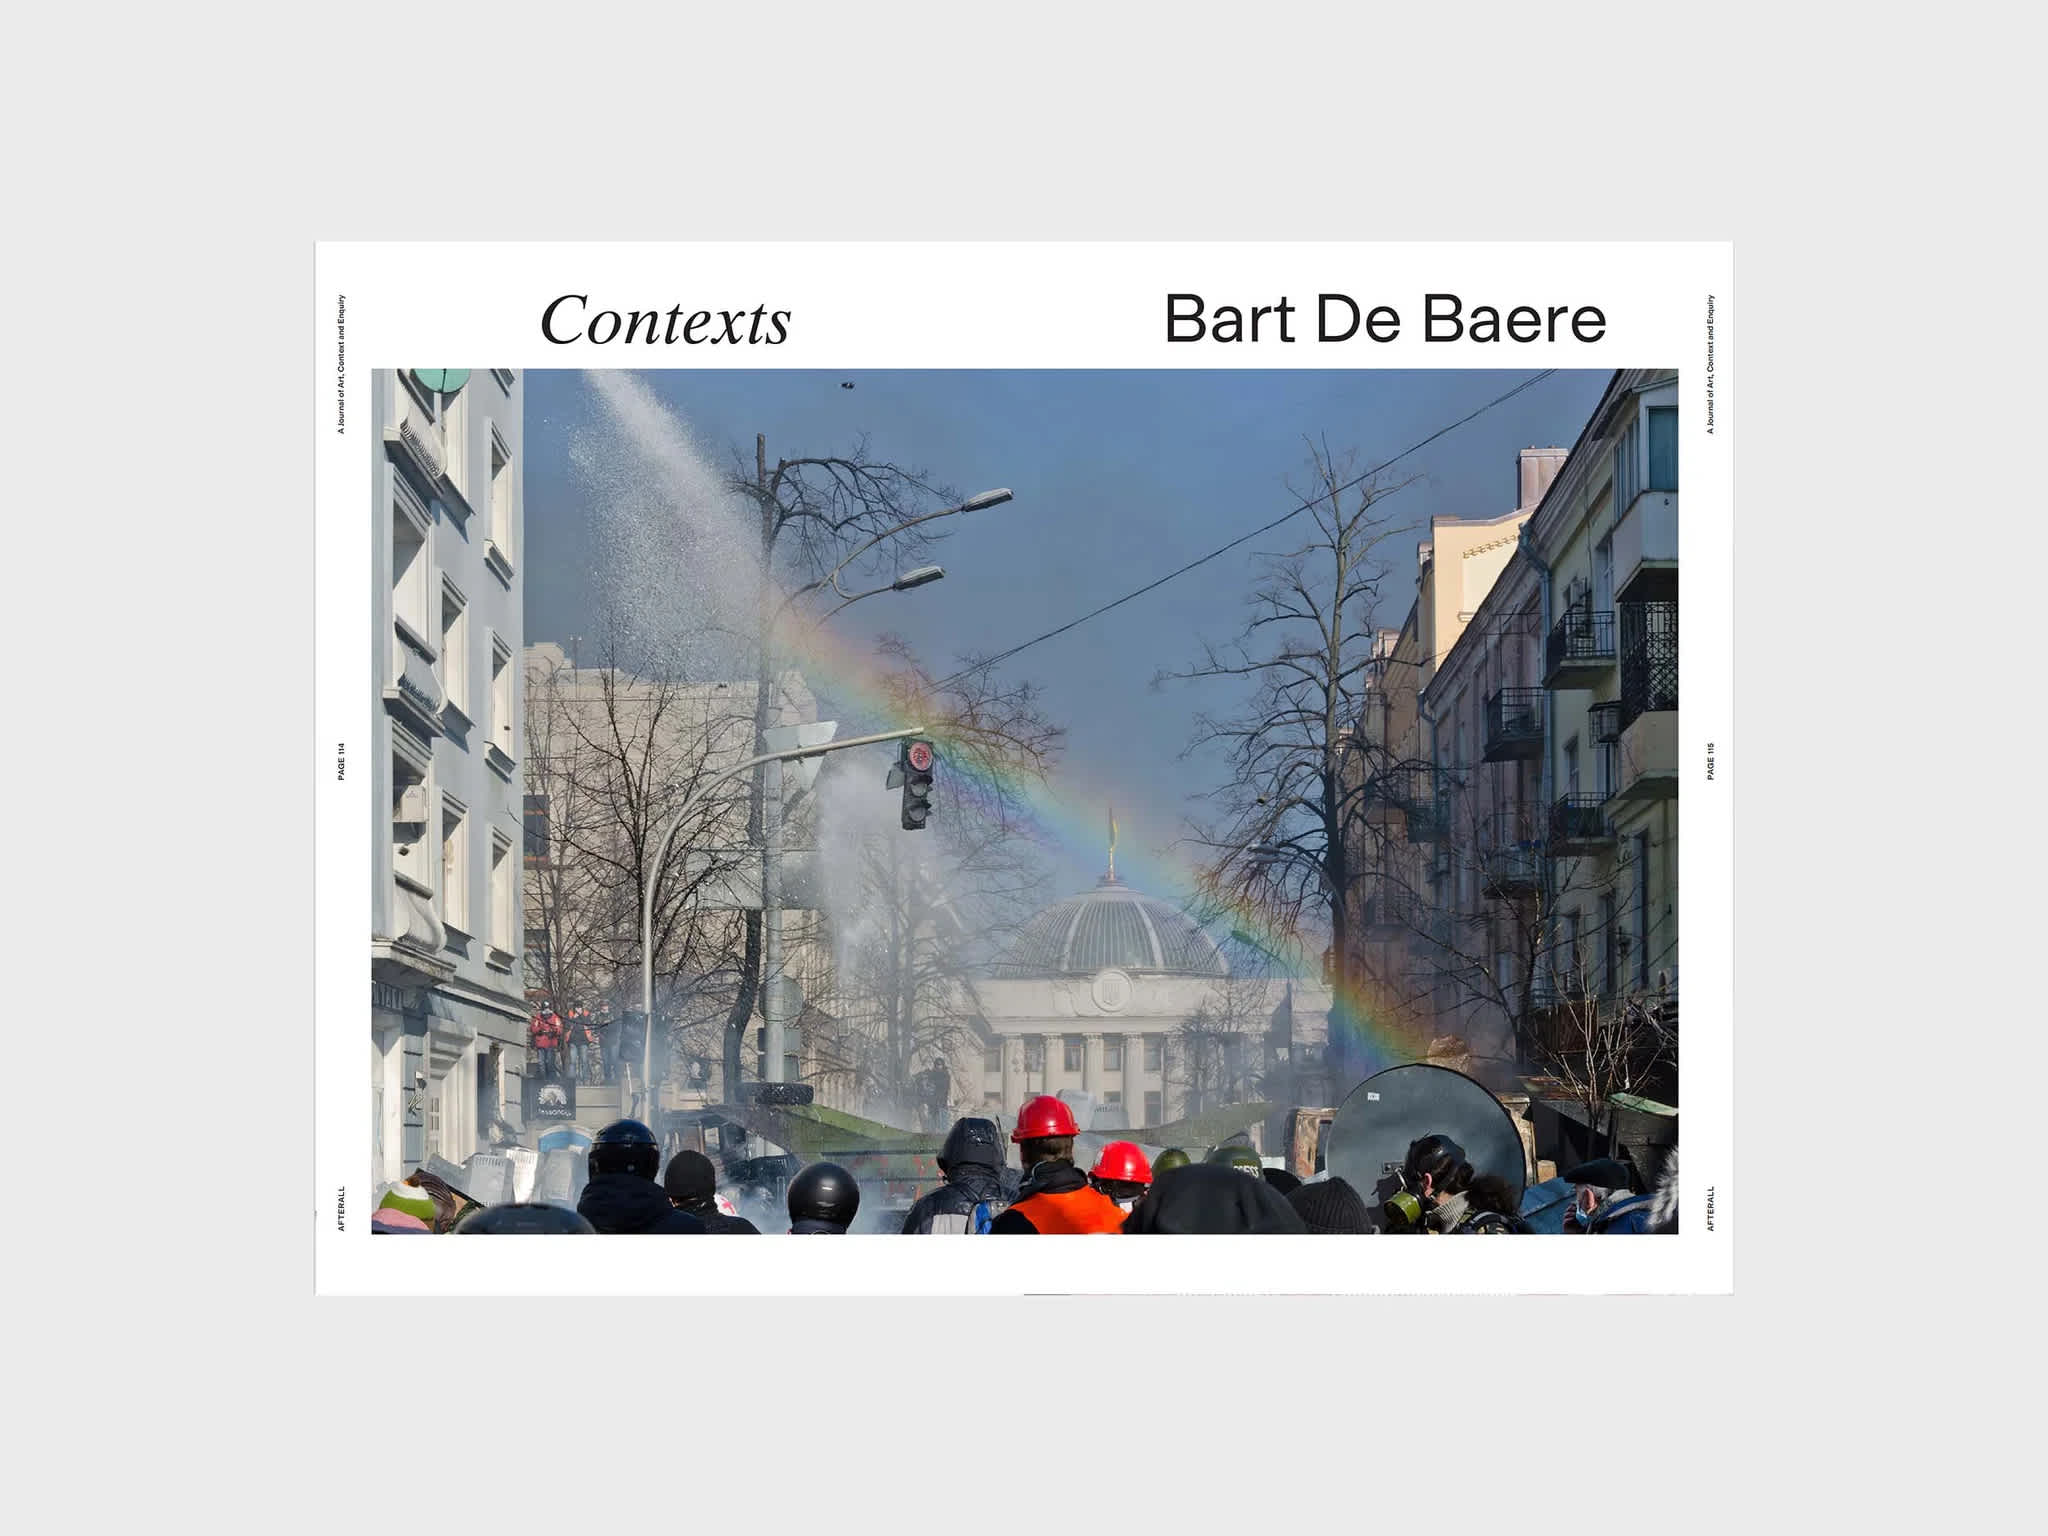 Centerfold magazine spread. The section title and author are on the top of each page. The image spread across both pages, features a rainbow stretching between two sides of a street. Below the rainbow is a crowd of people.